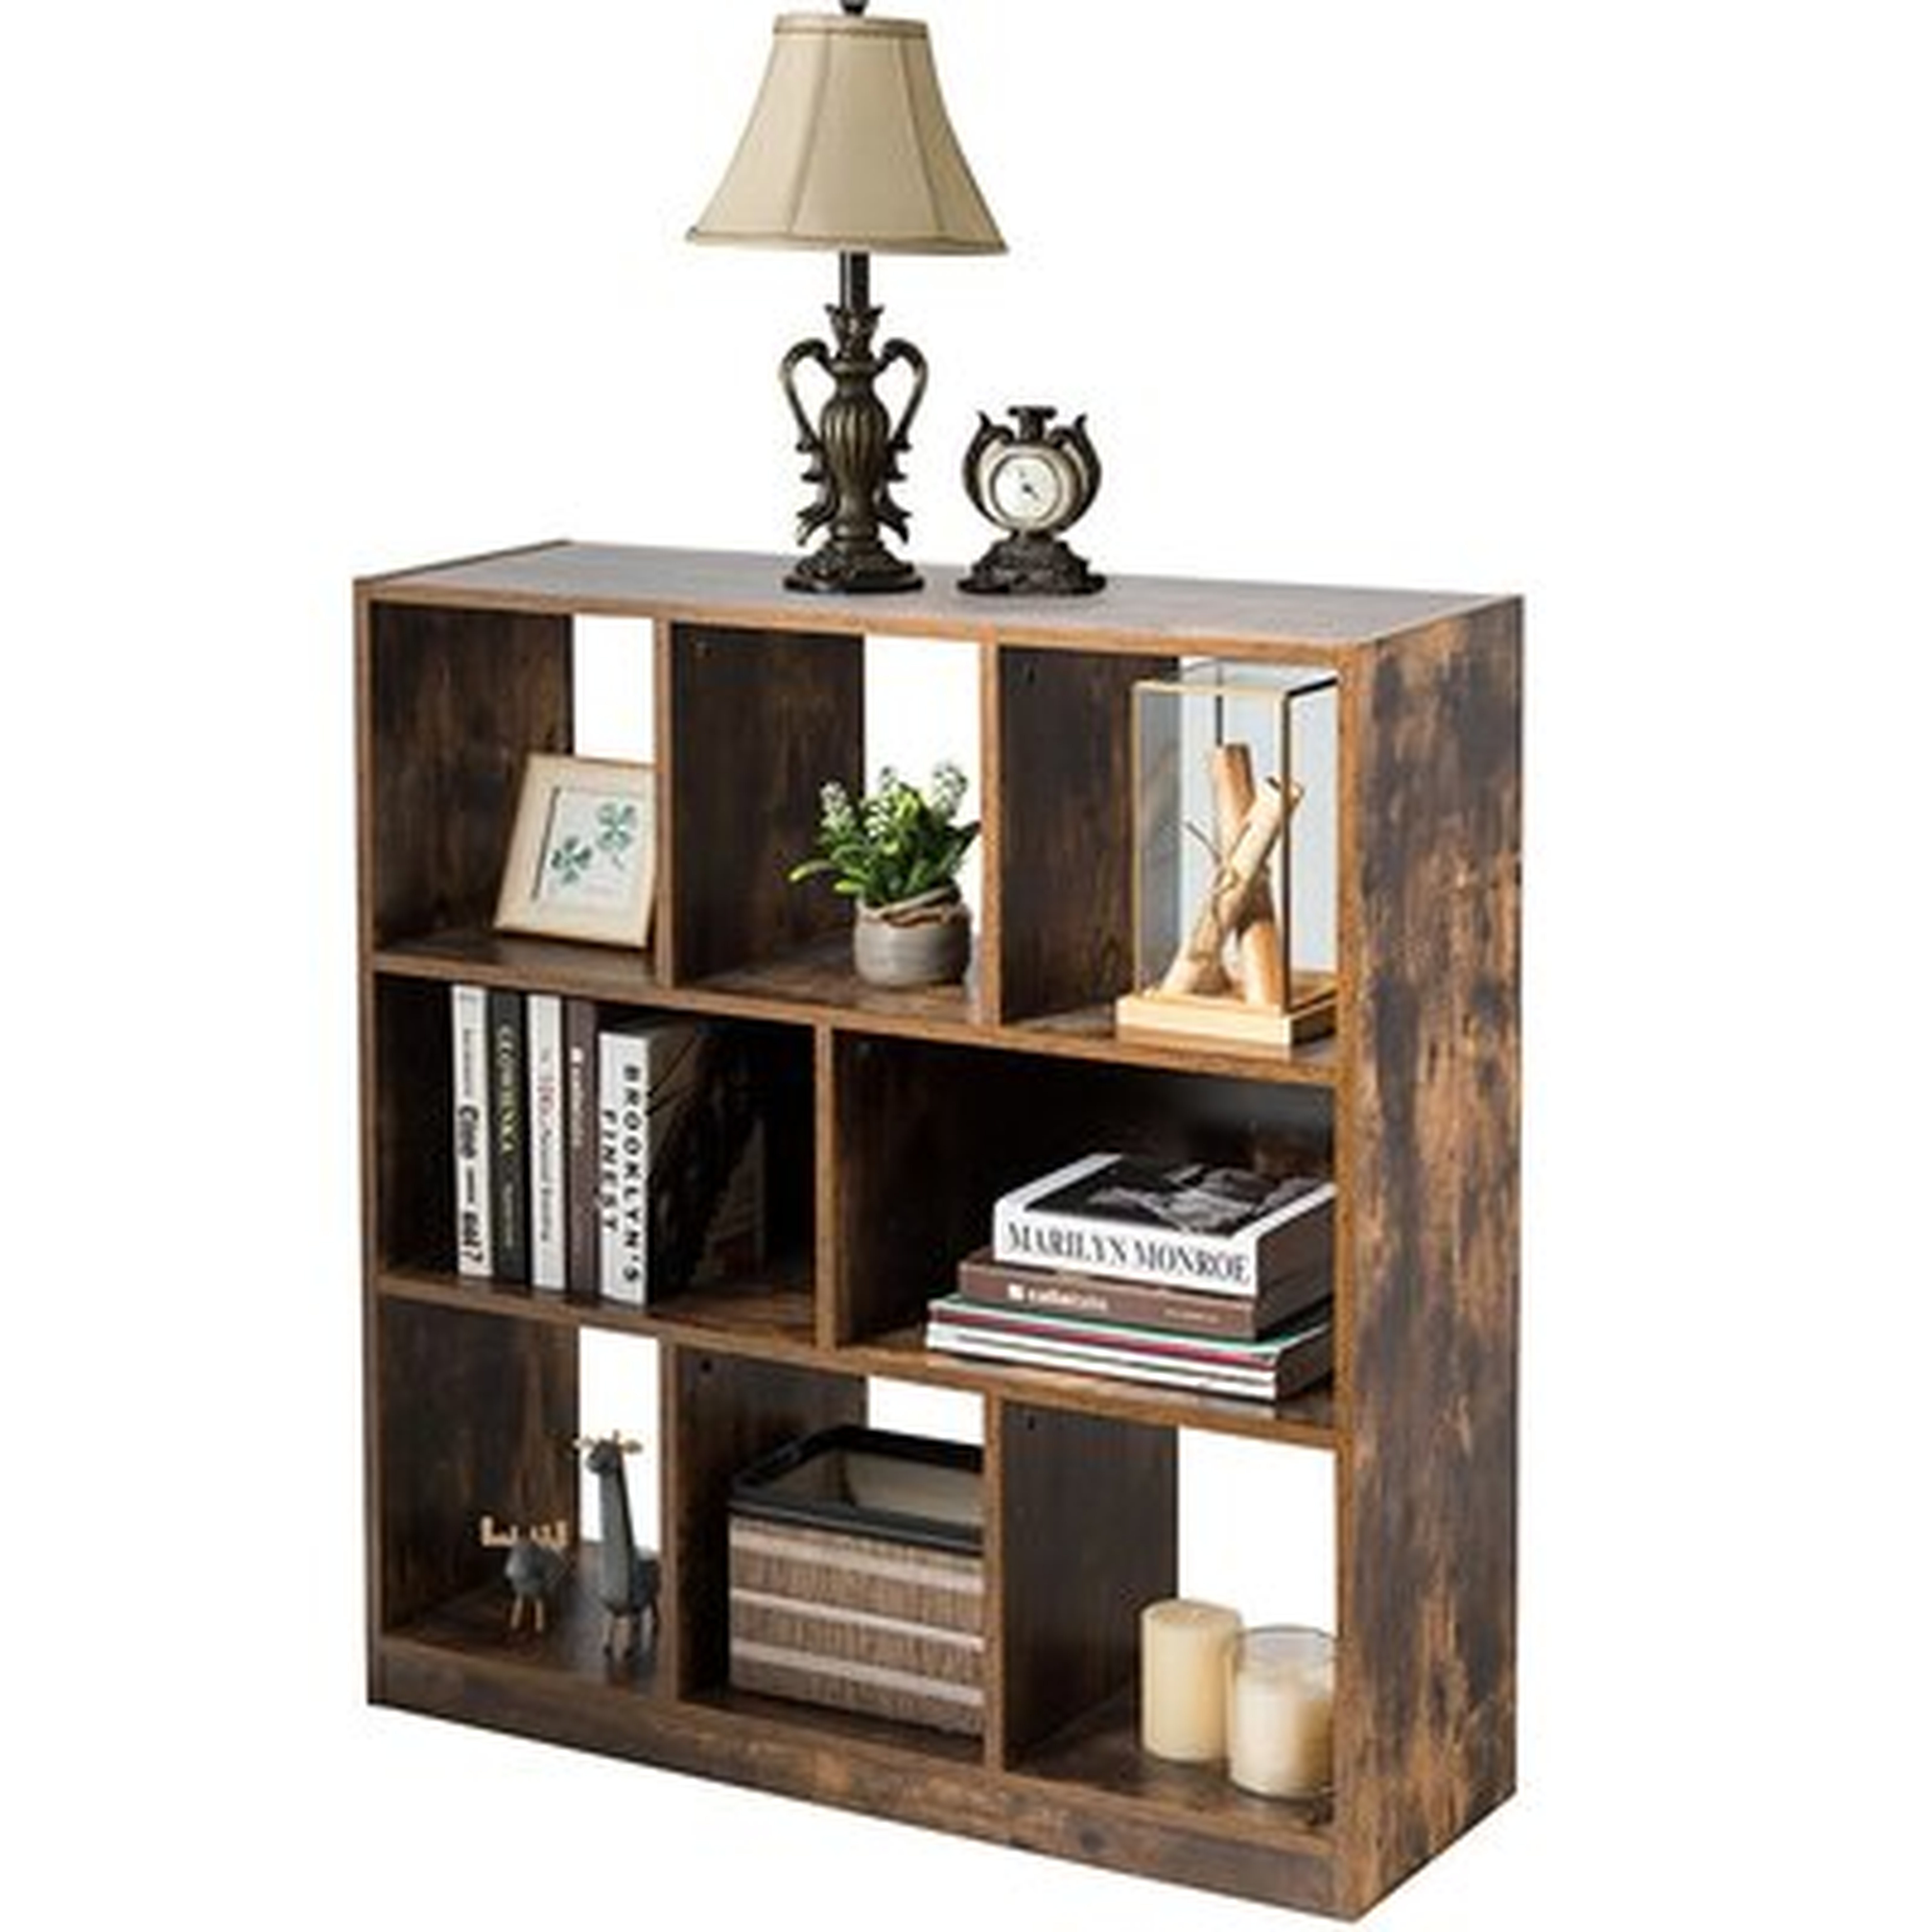 Stansell 37" H x 11" W Cube Bookcase - Wayfair